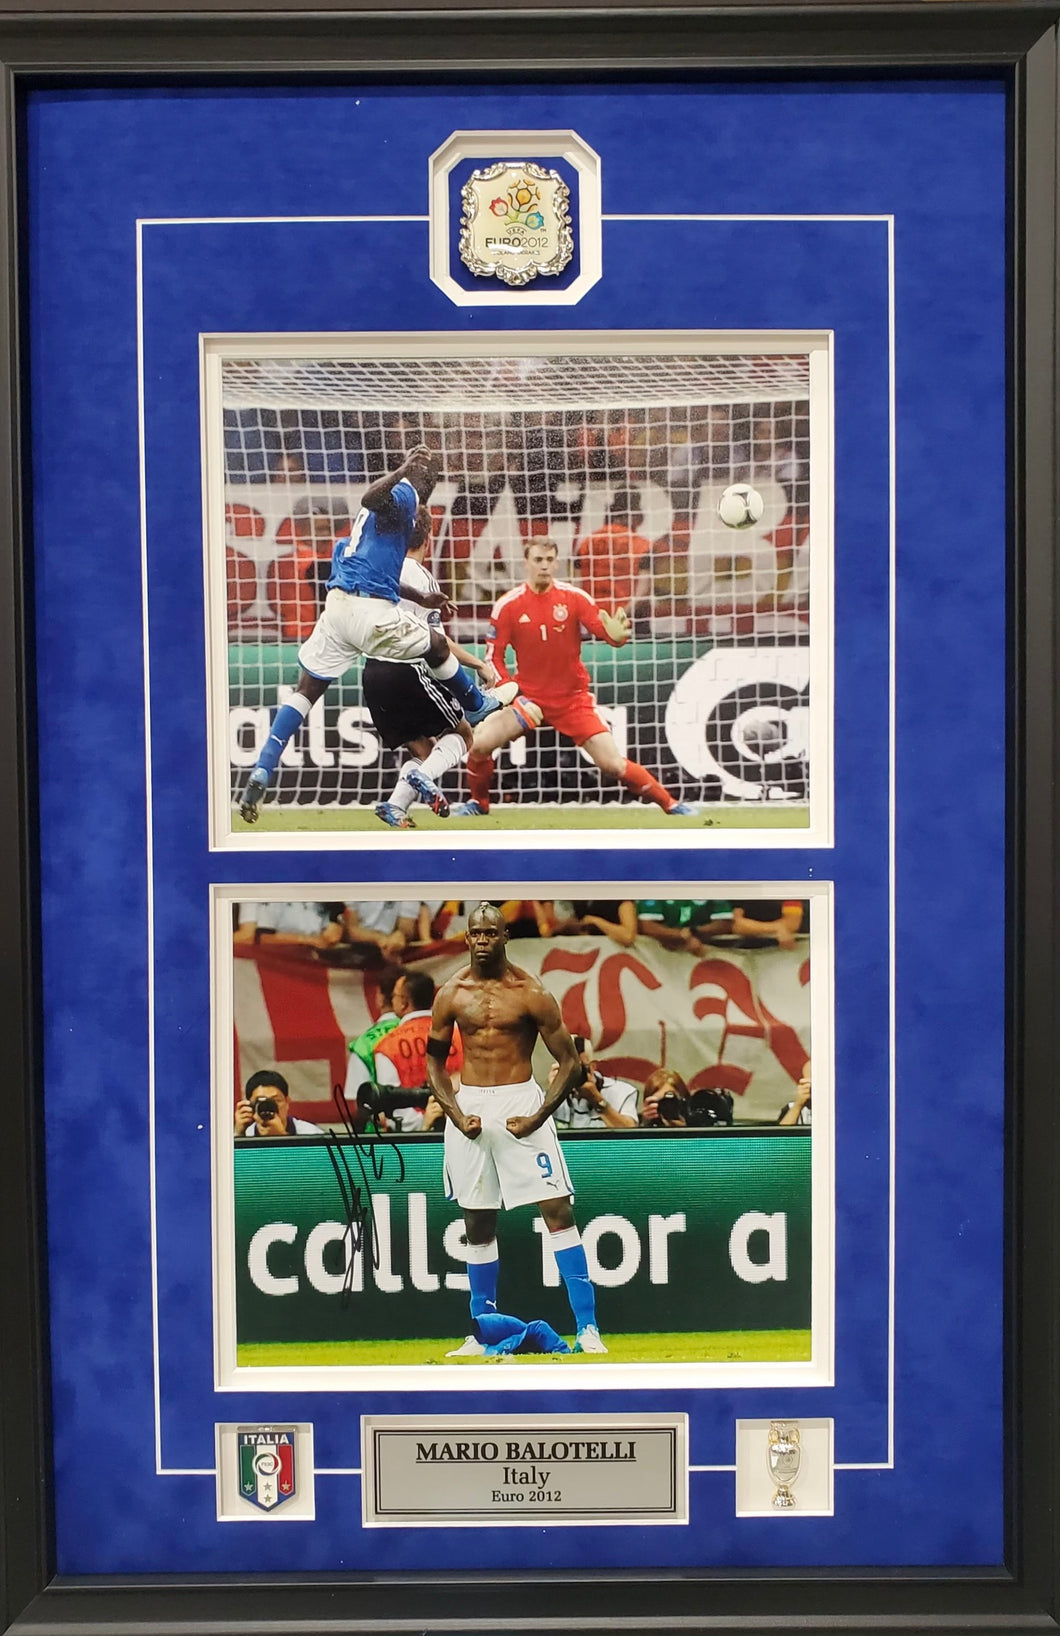 Signed and Framed Mario Balotelli 2012 Euro Cup Photo